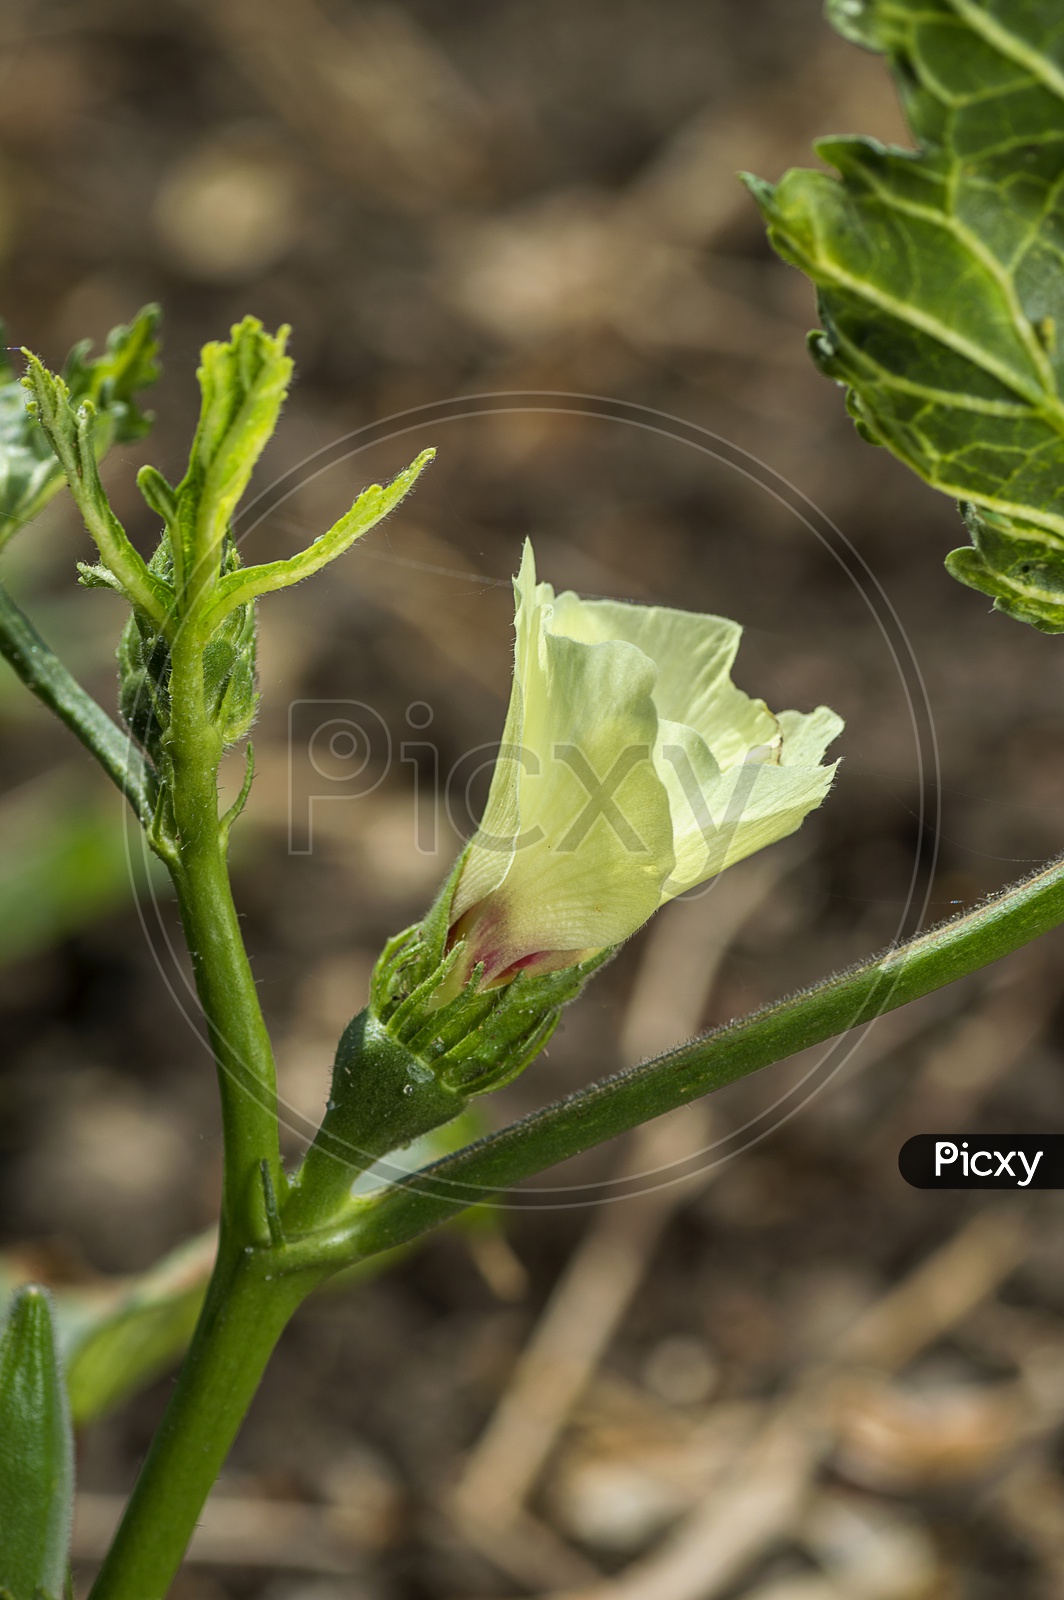 Young Okra or Lady's Finger Or Bendi  Growing Freshly In an Organic Farm